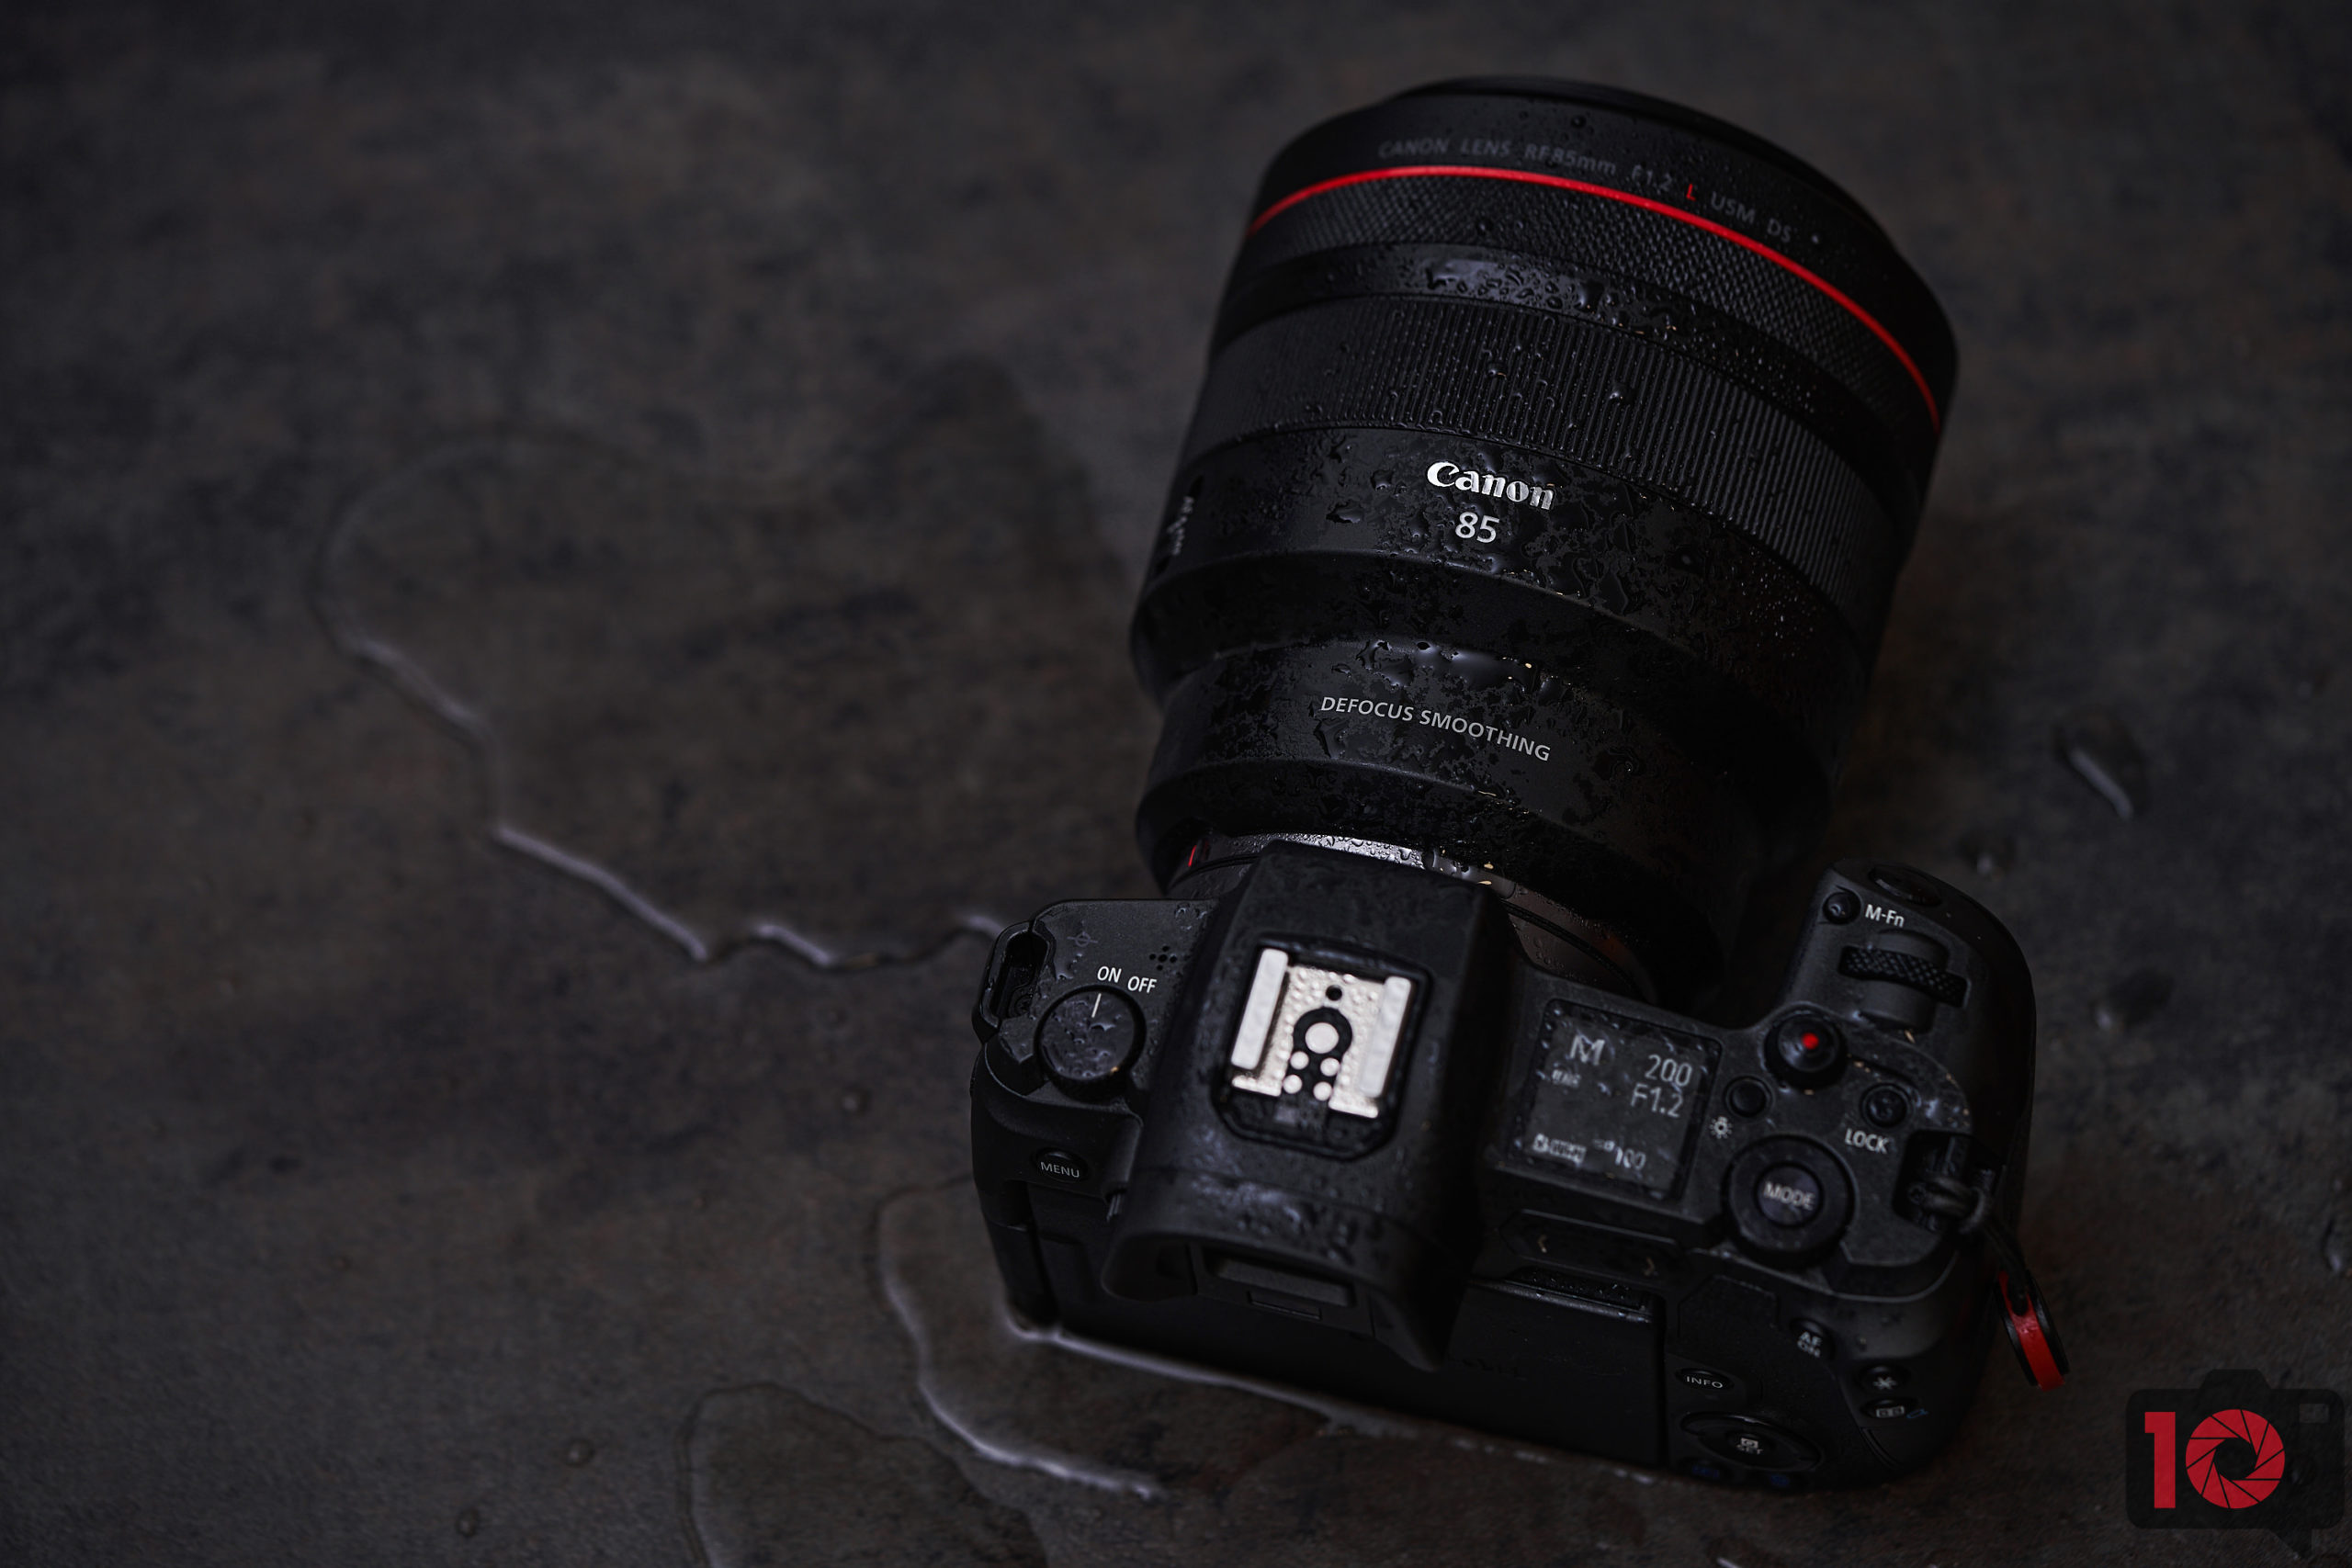 Bokeh for Days! The Canon RF 85mm F1.2 L USM DS Review